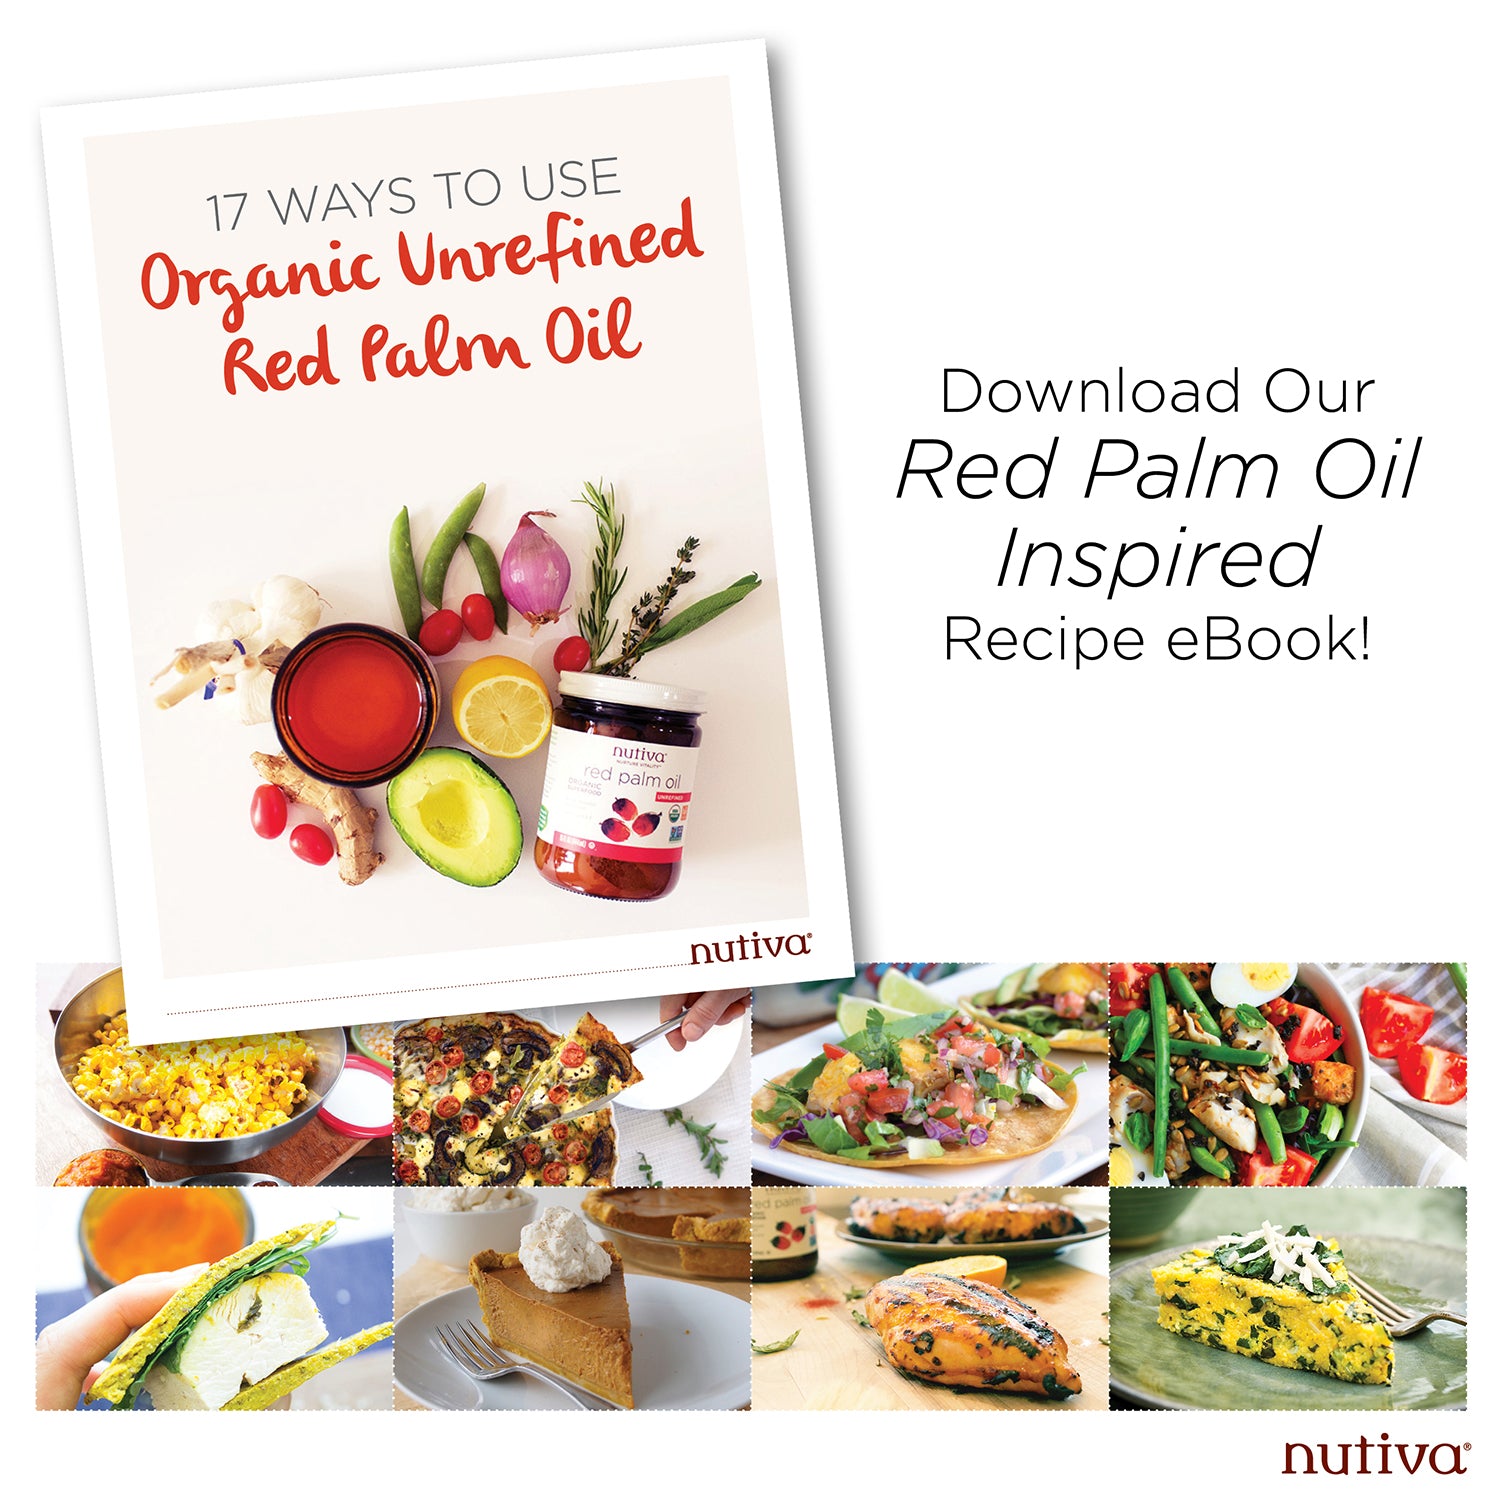 Red Palm Oil for cooking - Pure Indian Foods Blog